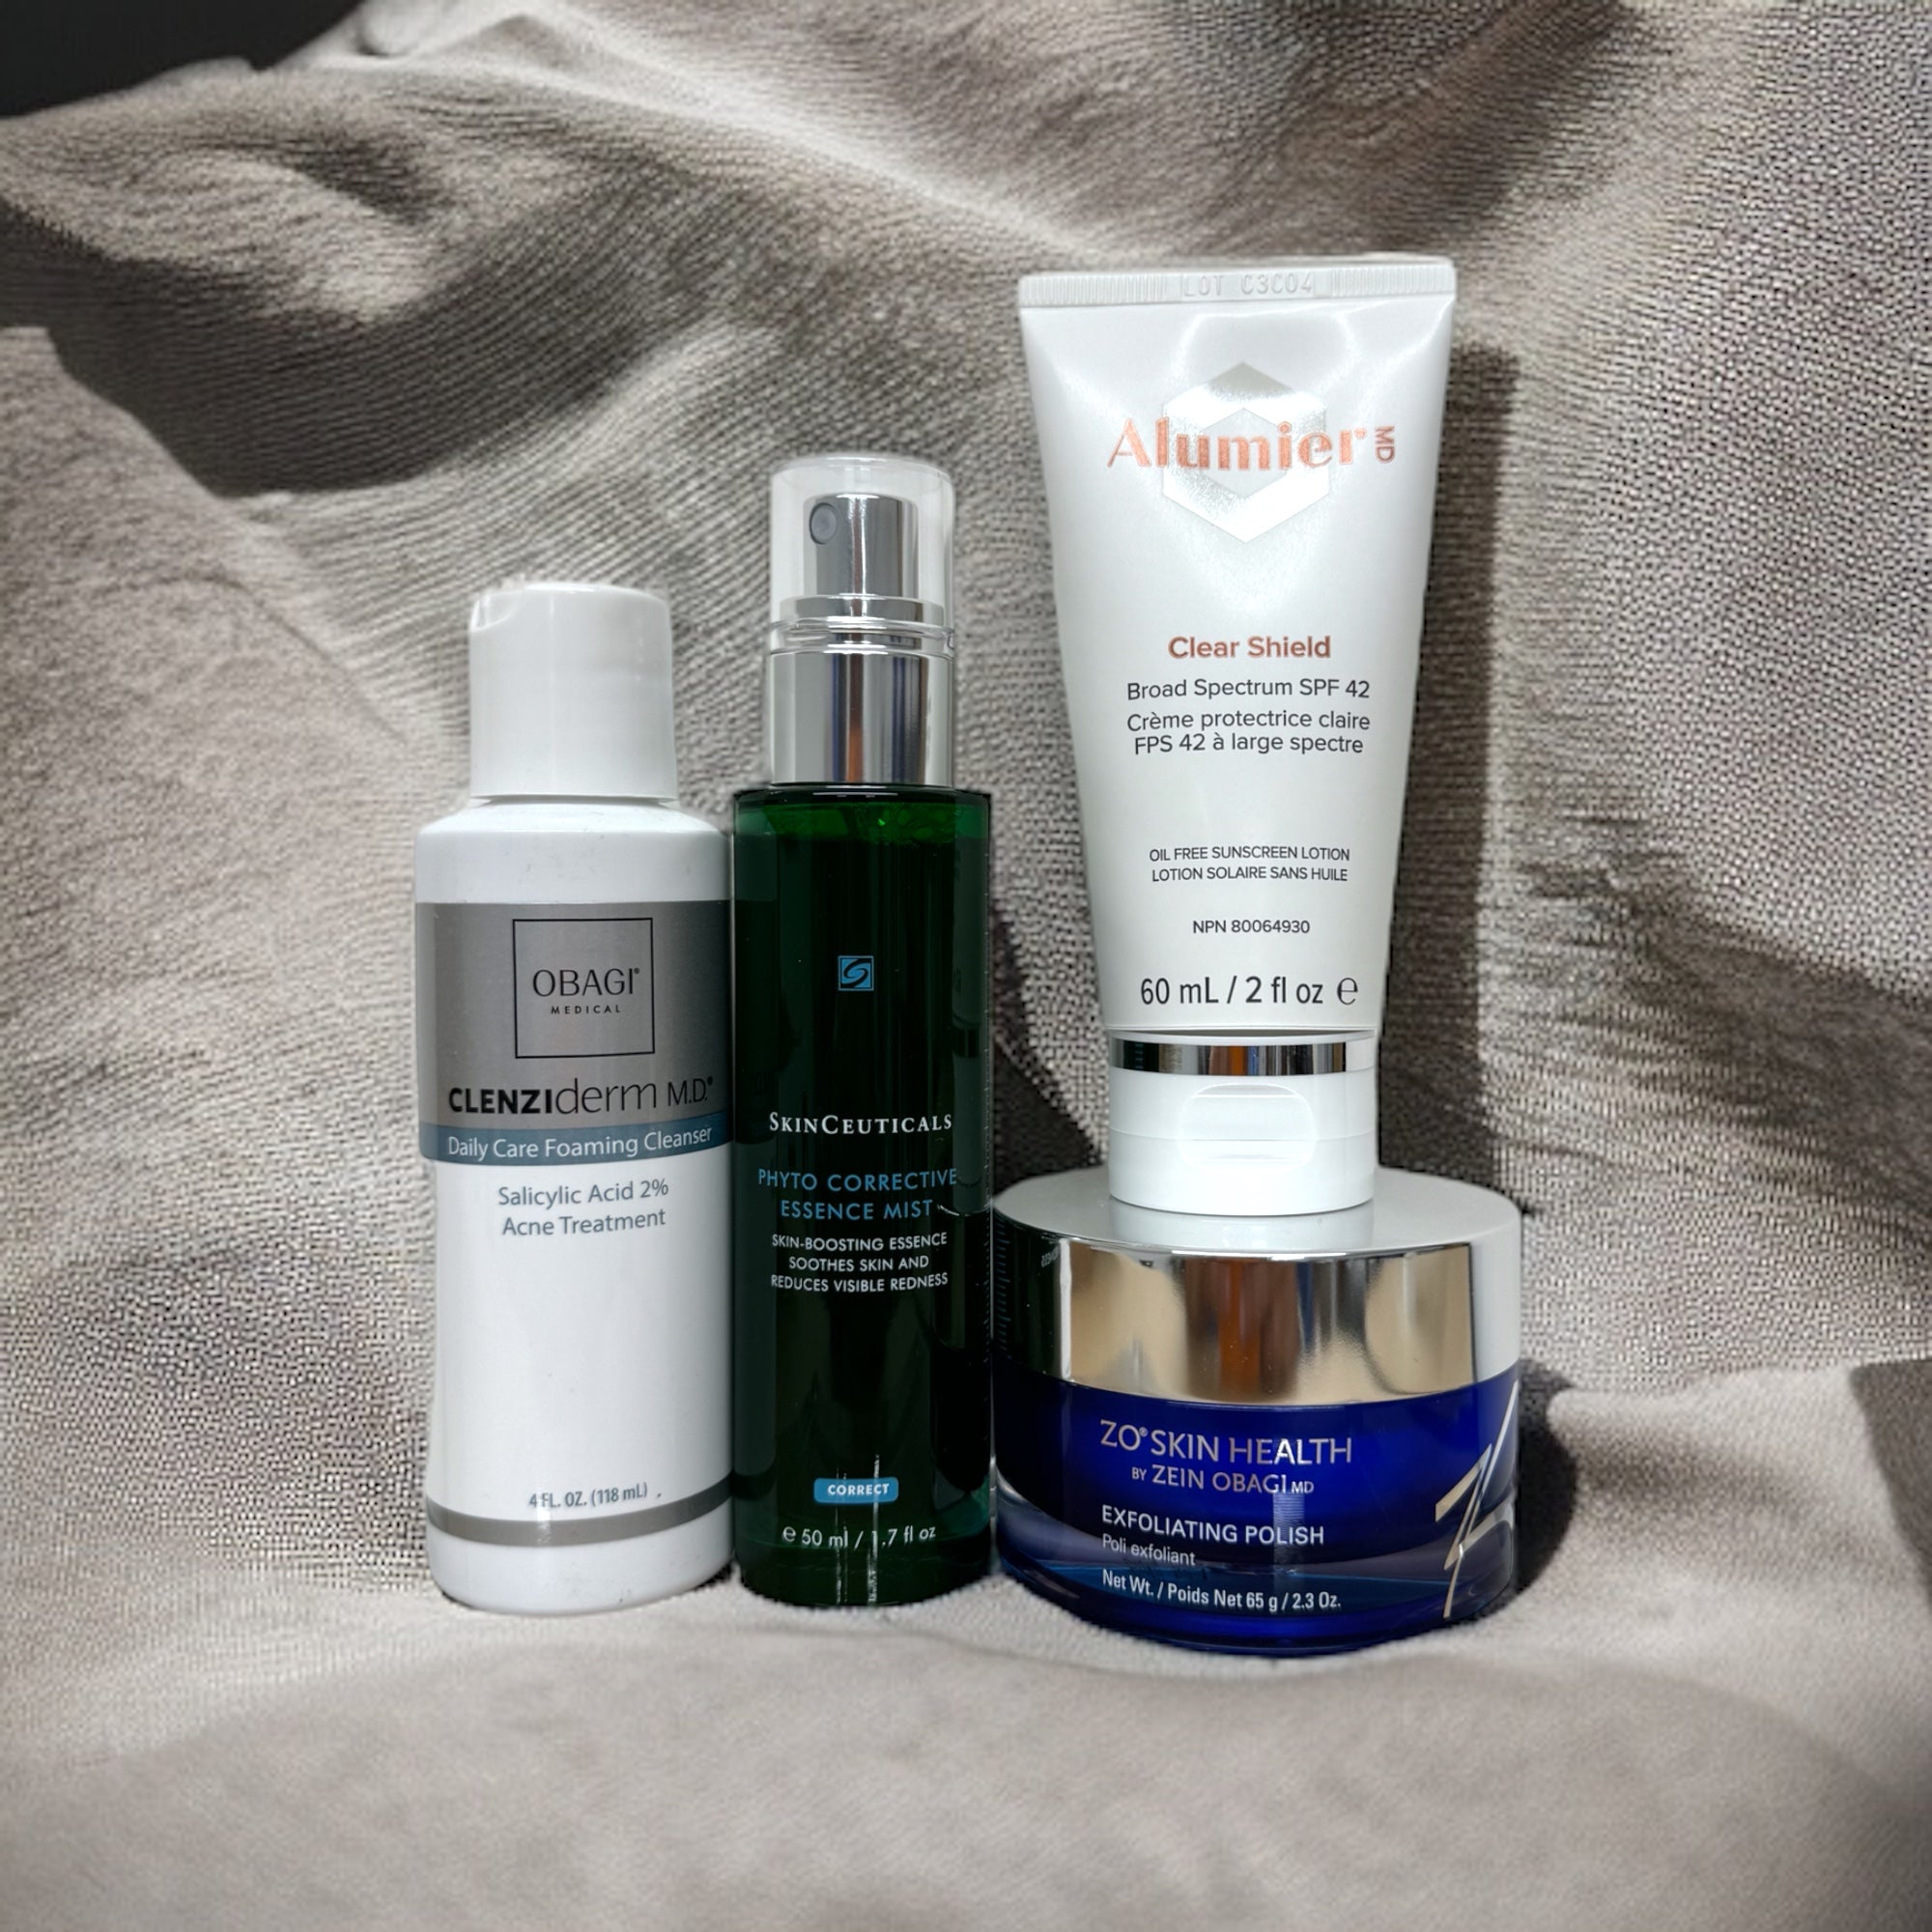 Men's Essential Skincare Routine (Normal to Oily Skin)